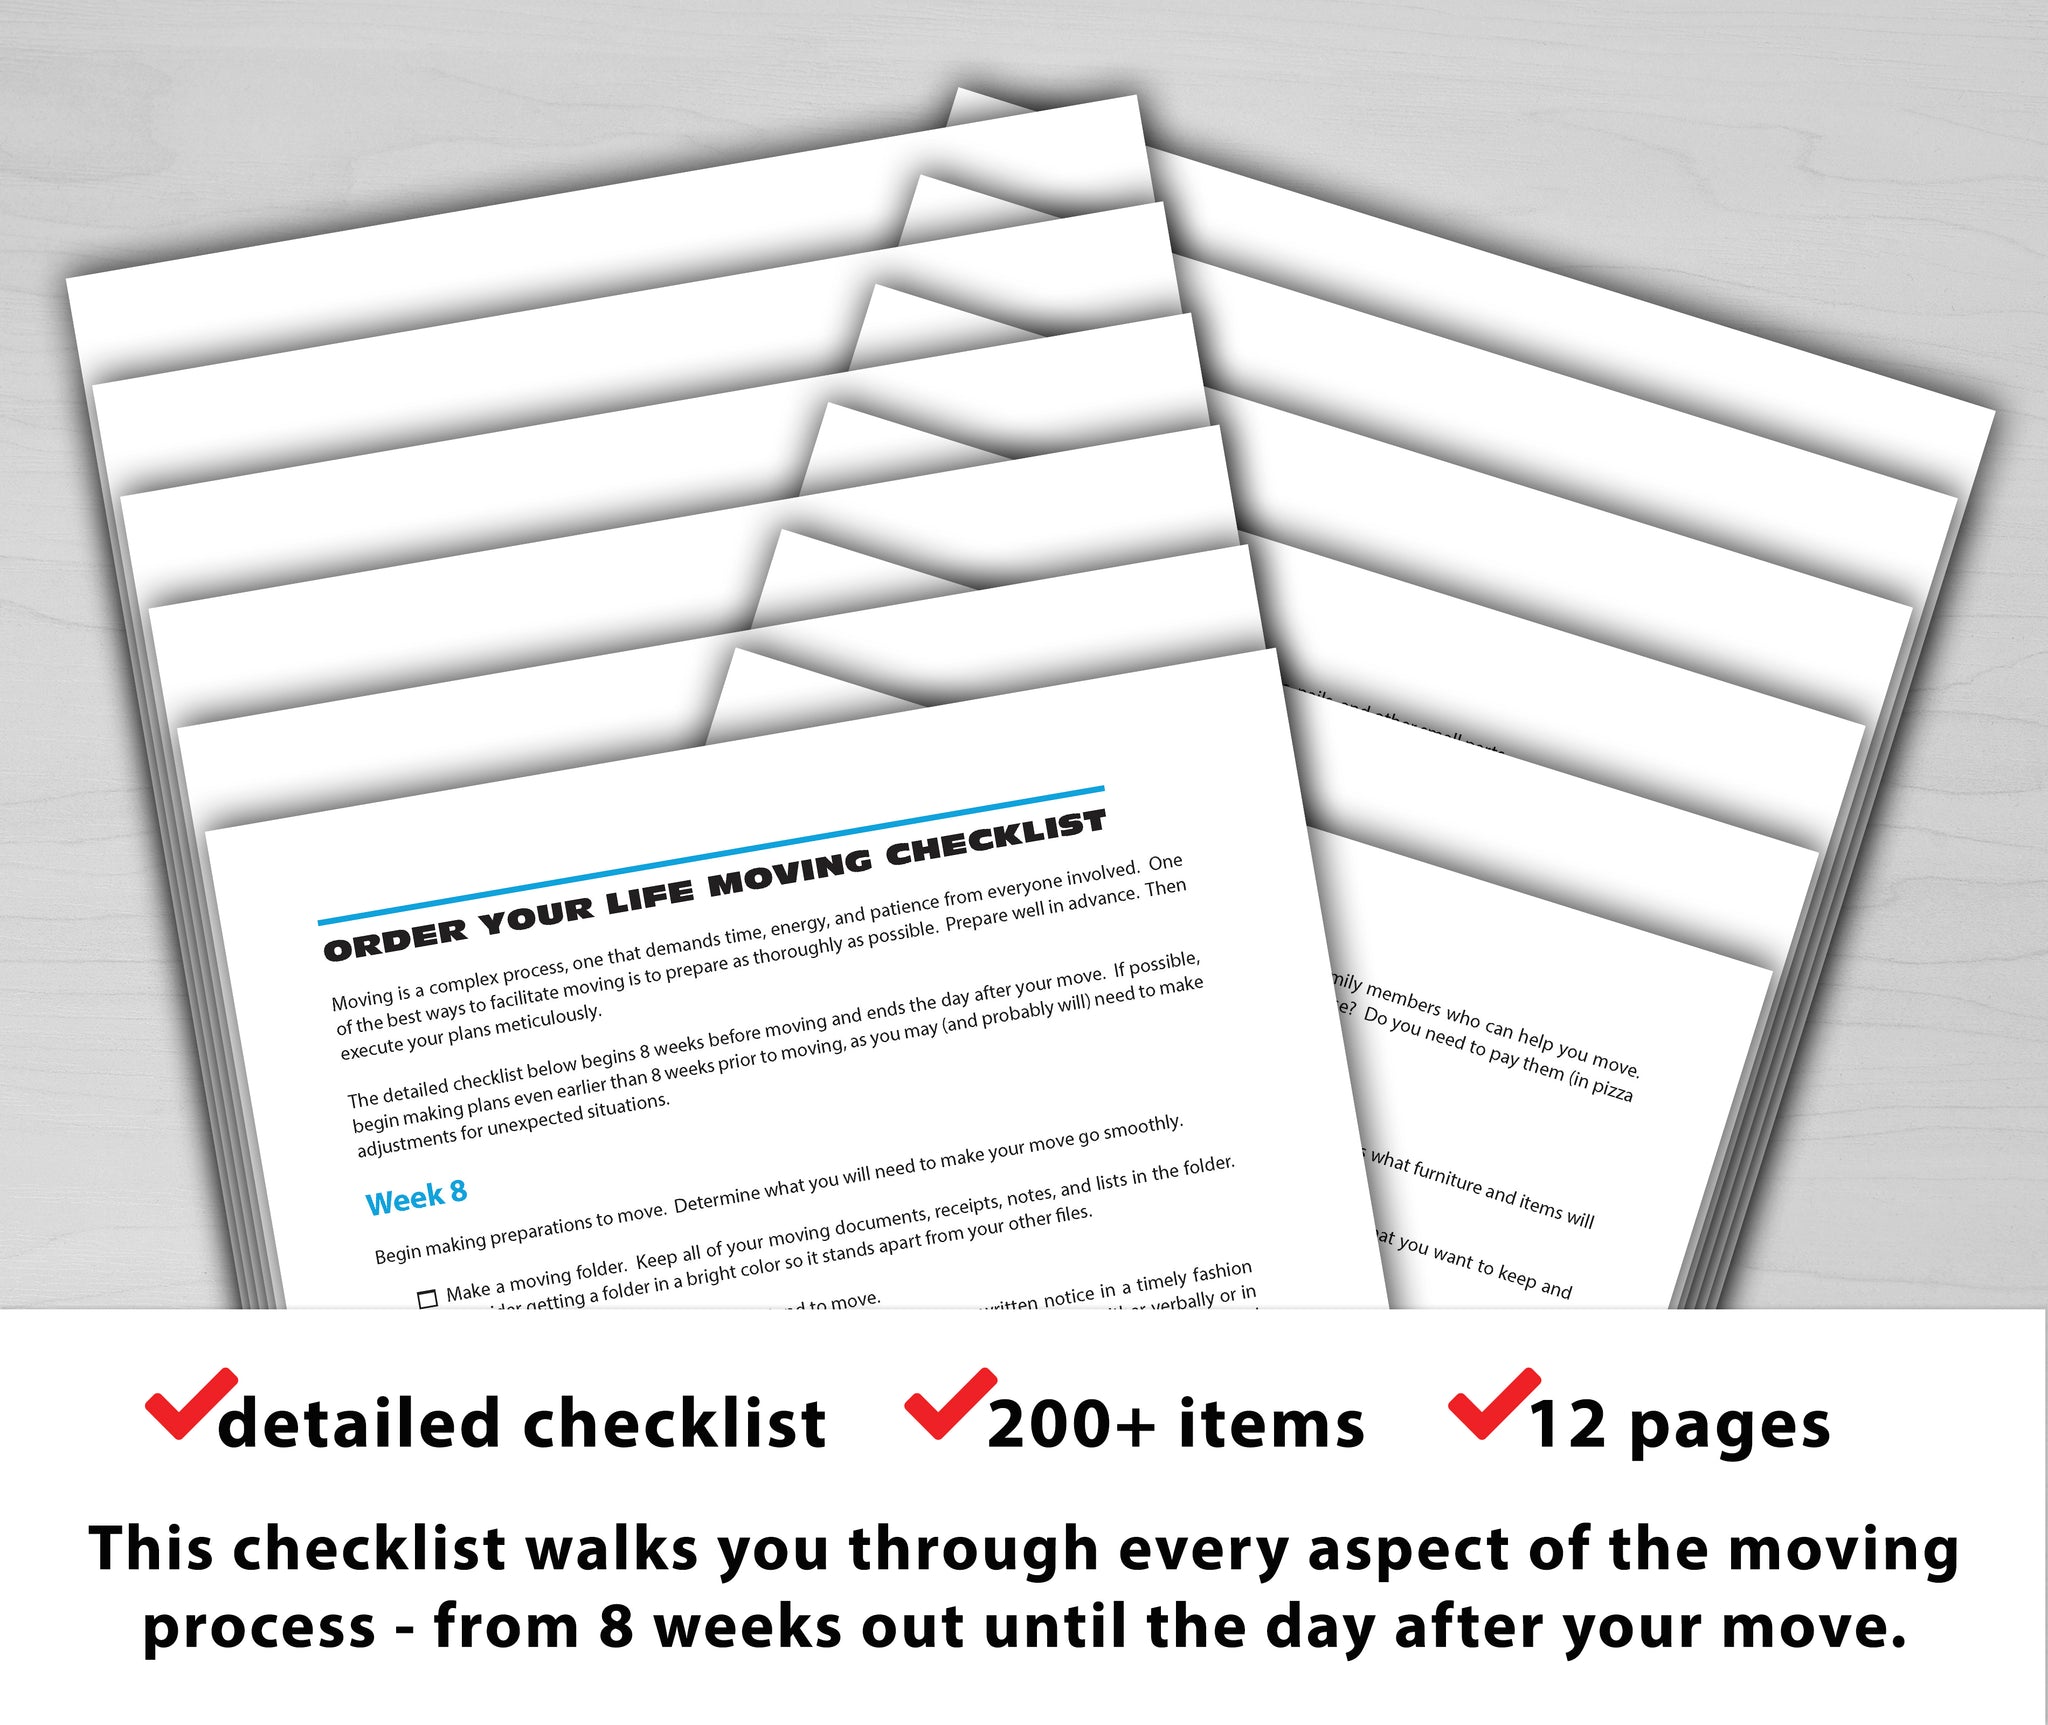 Order Your Life Moving Checklist